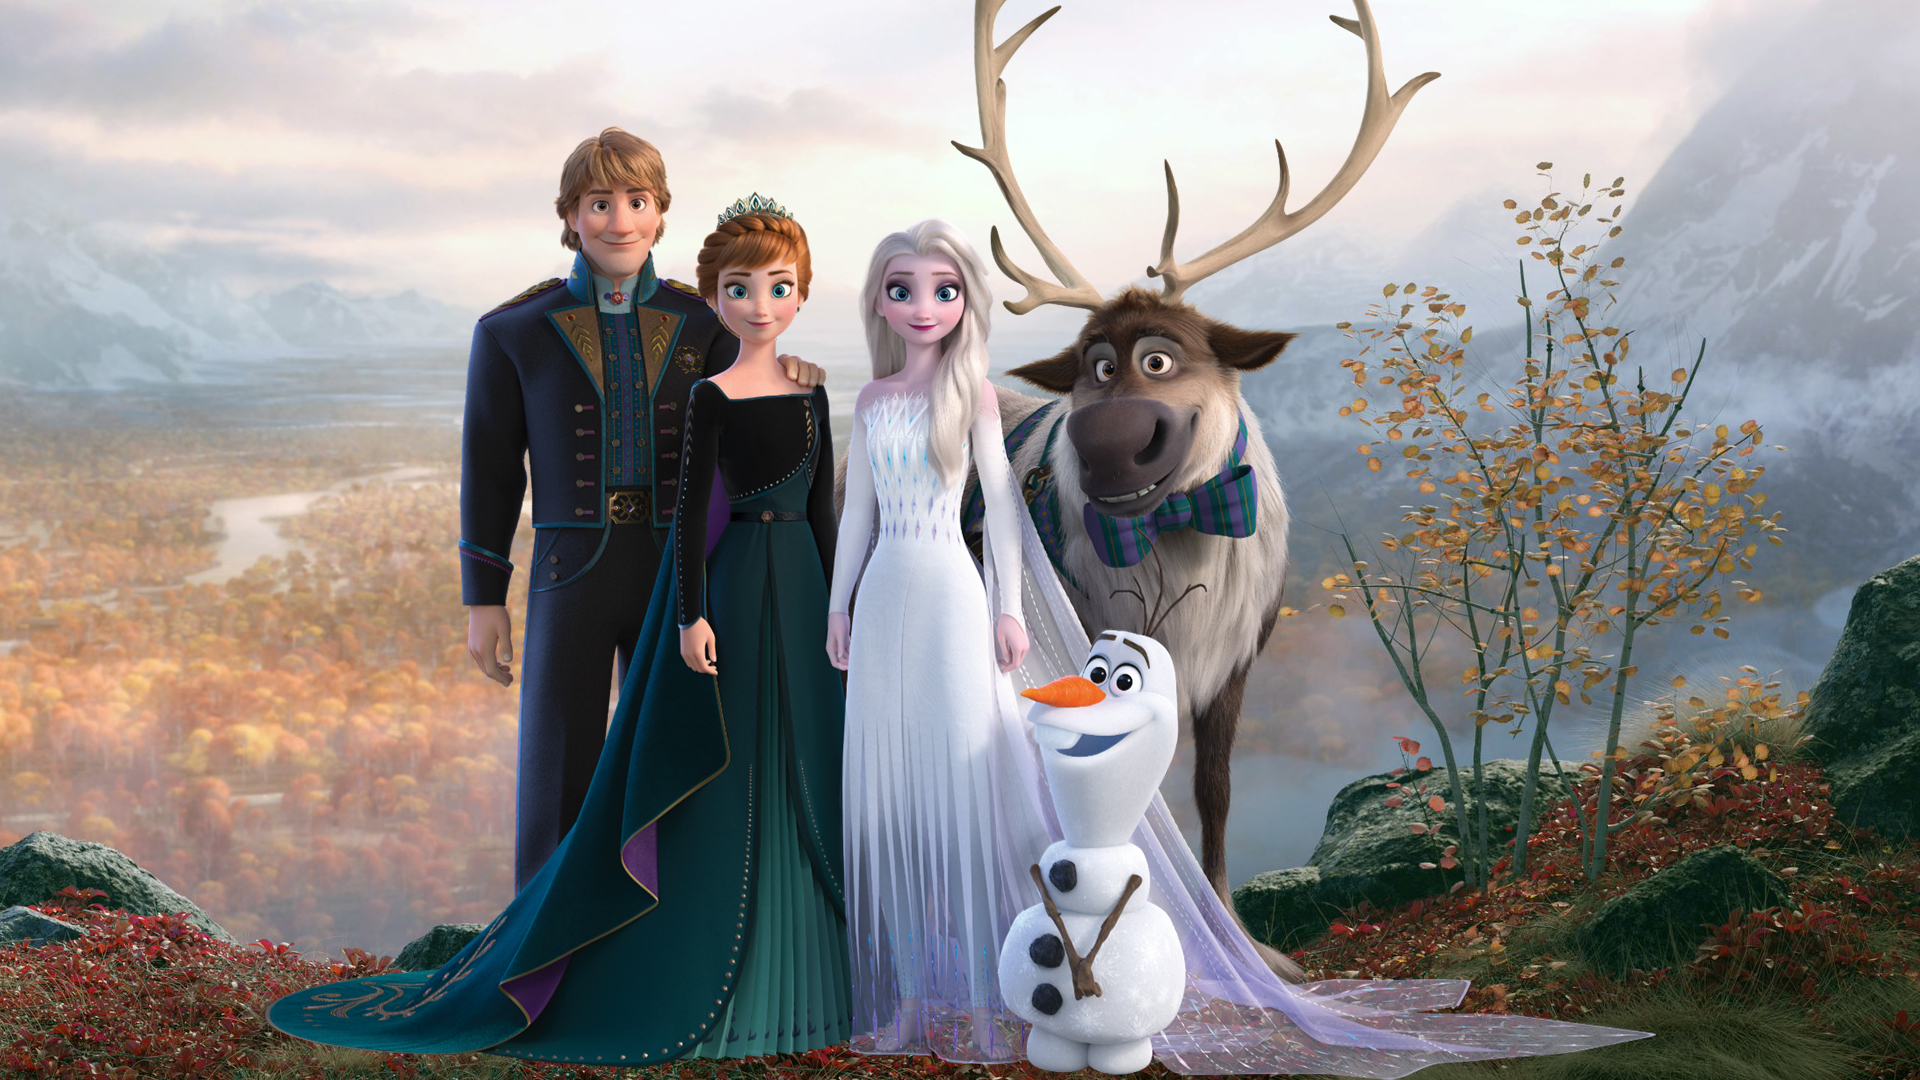 15 new Frozen 2 HD wallpapers with Elsa in white dress and her hair ...